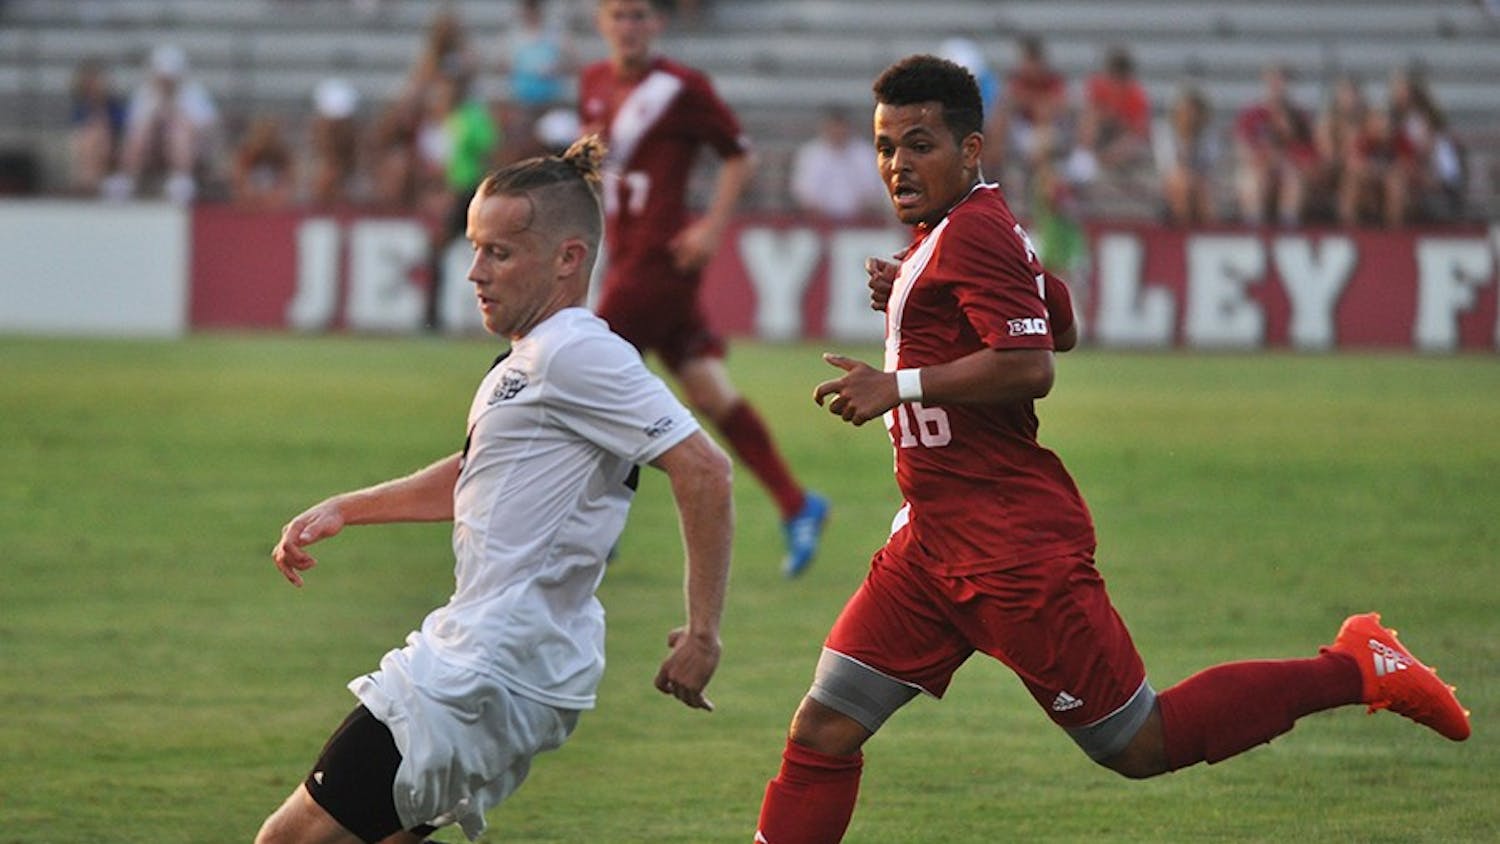 Sophomore midfielder Rees Wedderburn chases down an Oakland player during IU's exhibition game last Thursday.